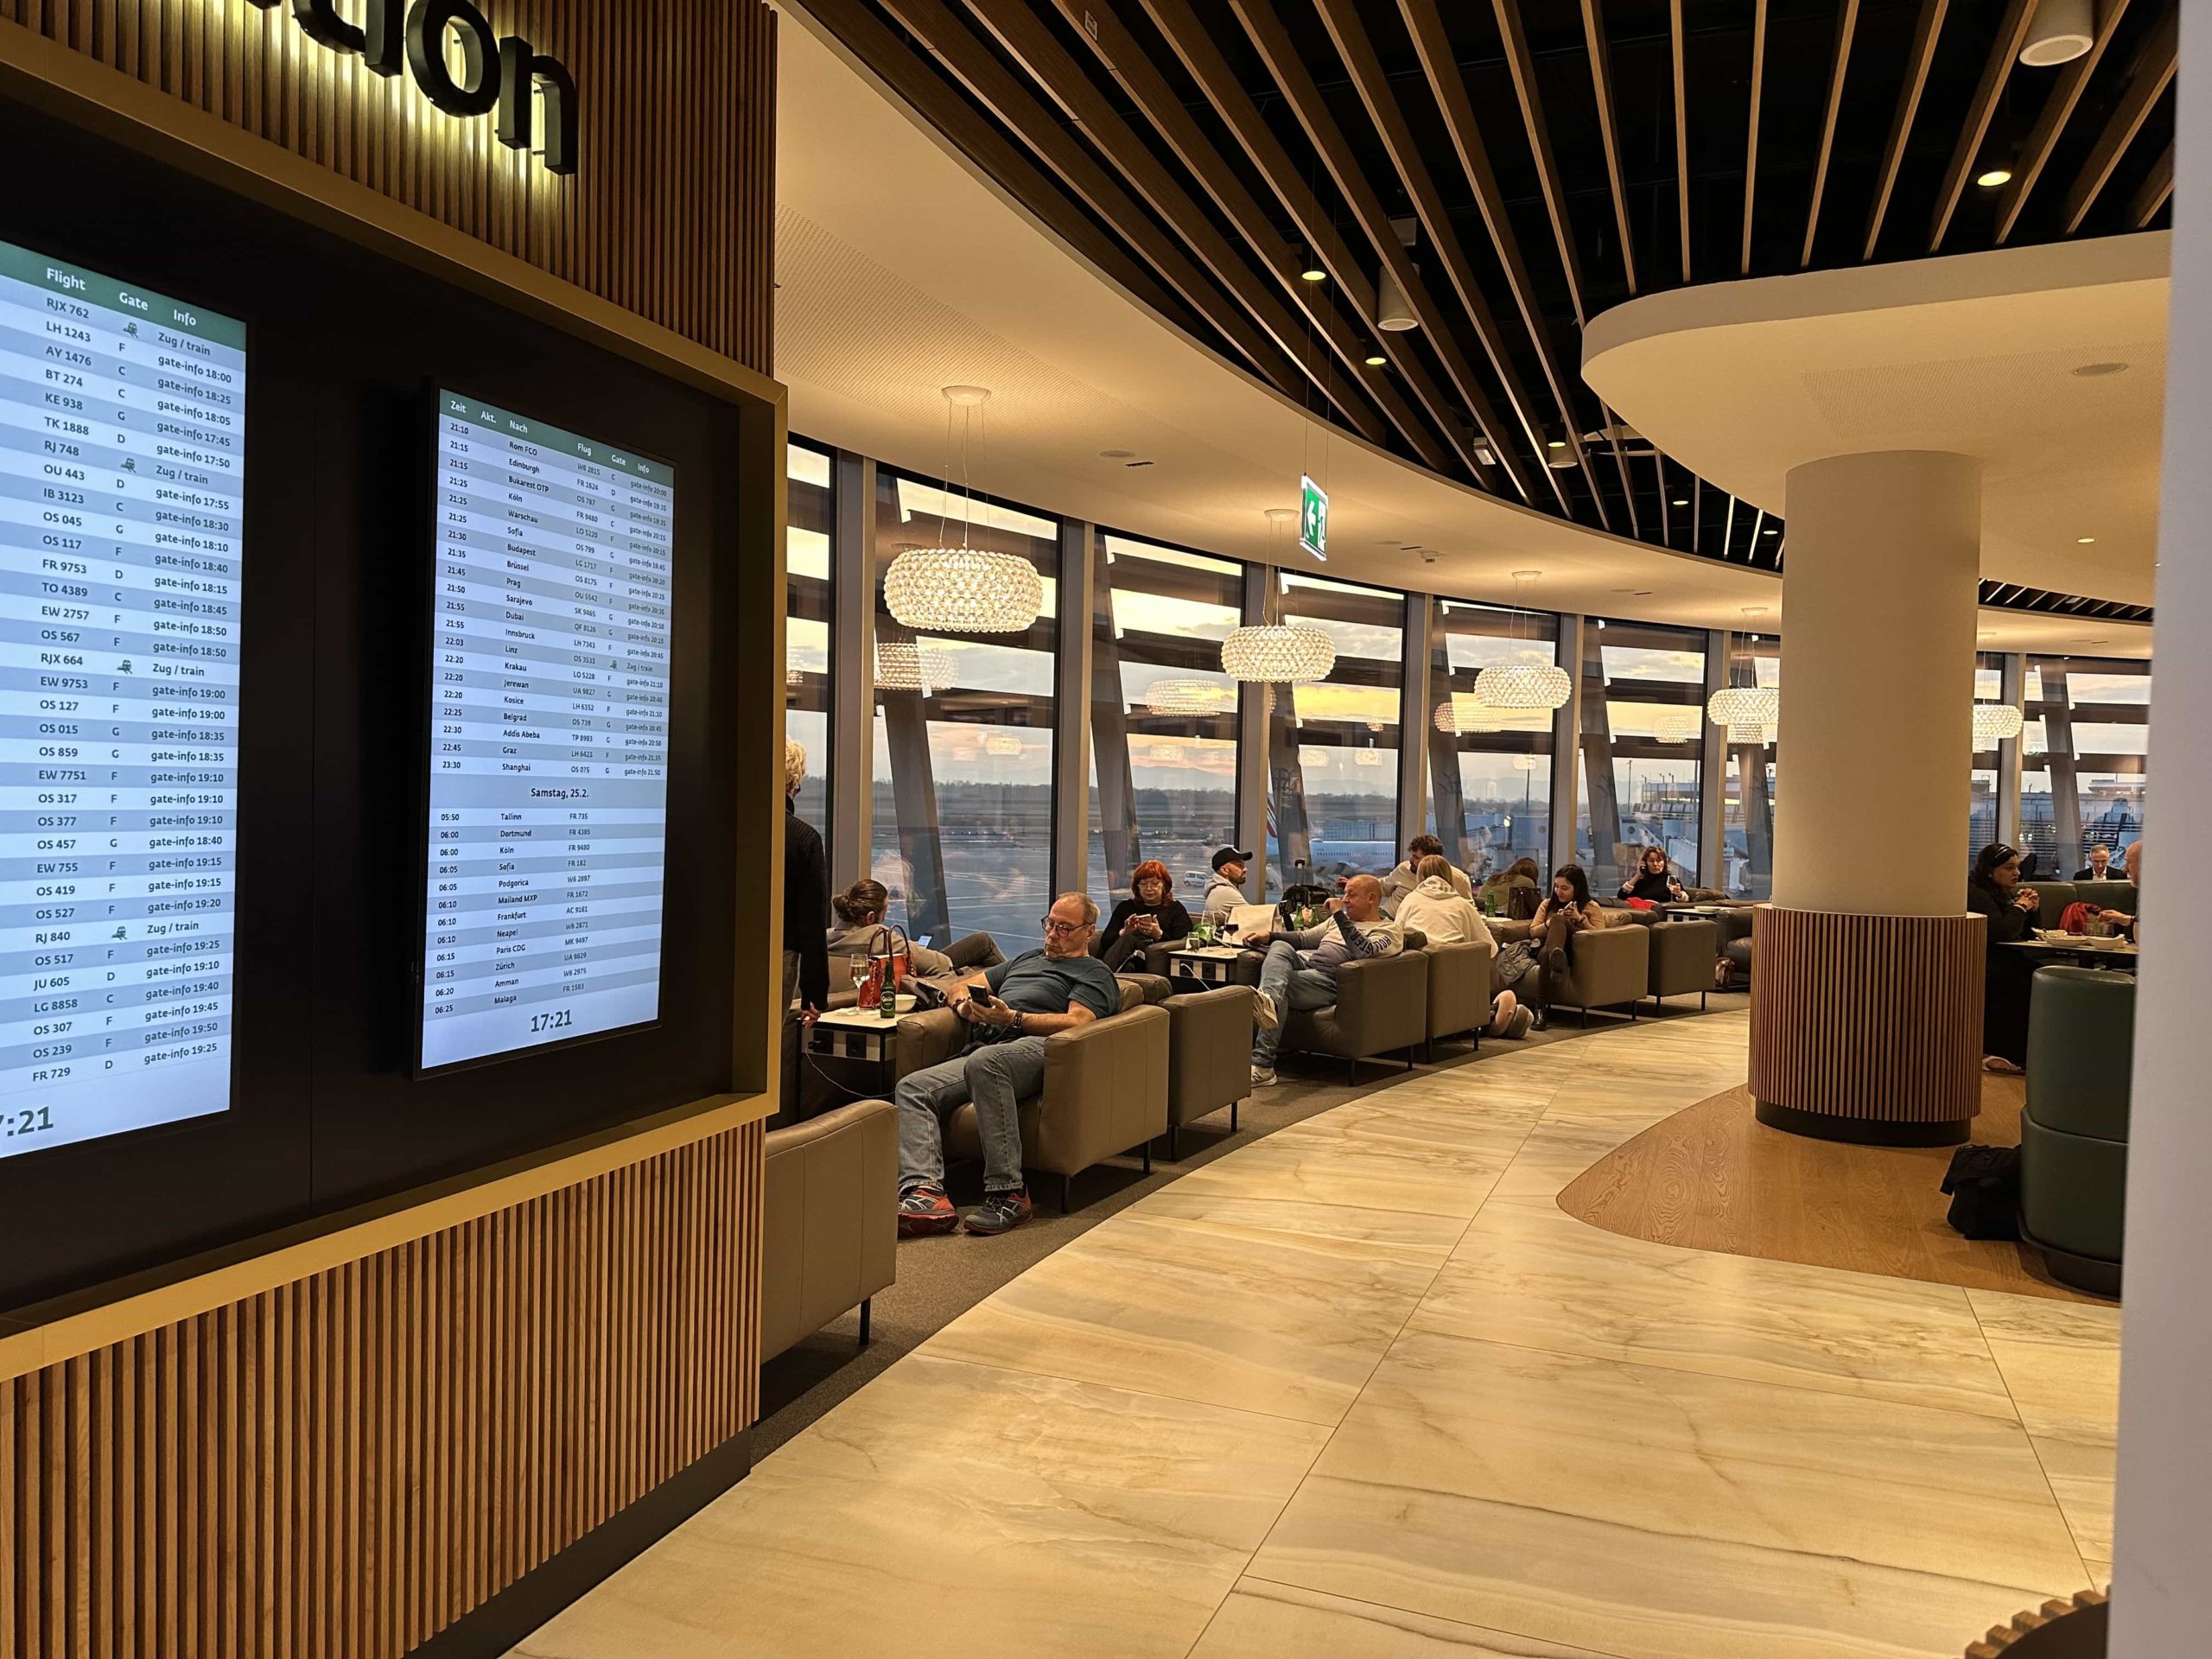 Sweeping, panoramic windows, encircling the main space in an airport lounge